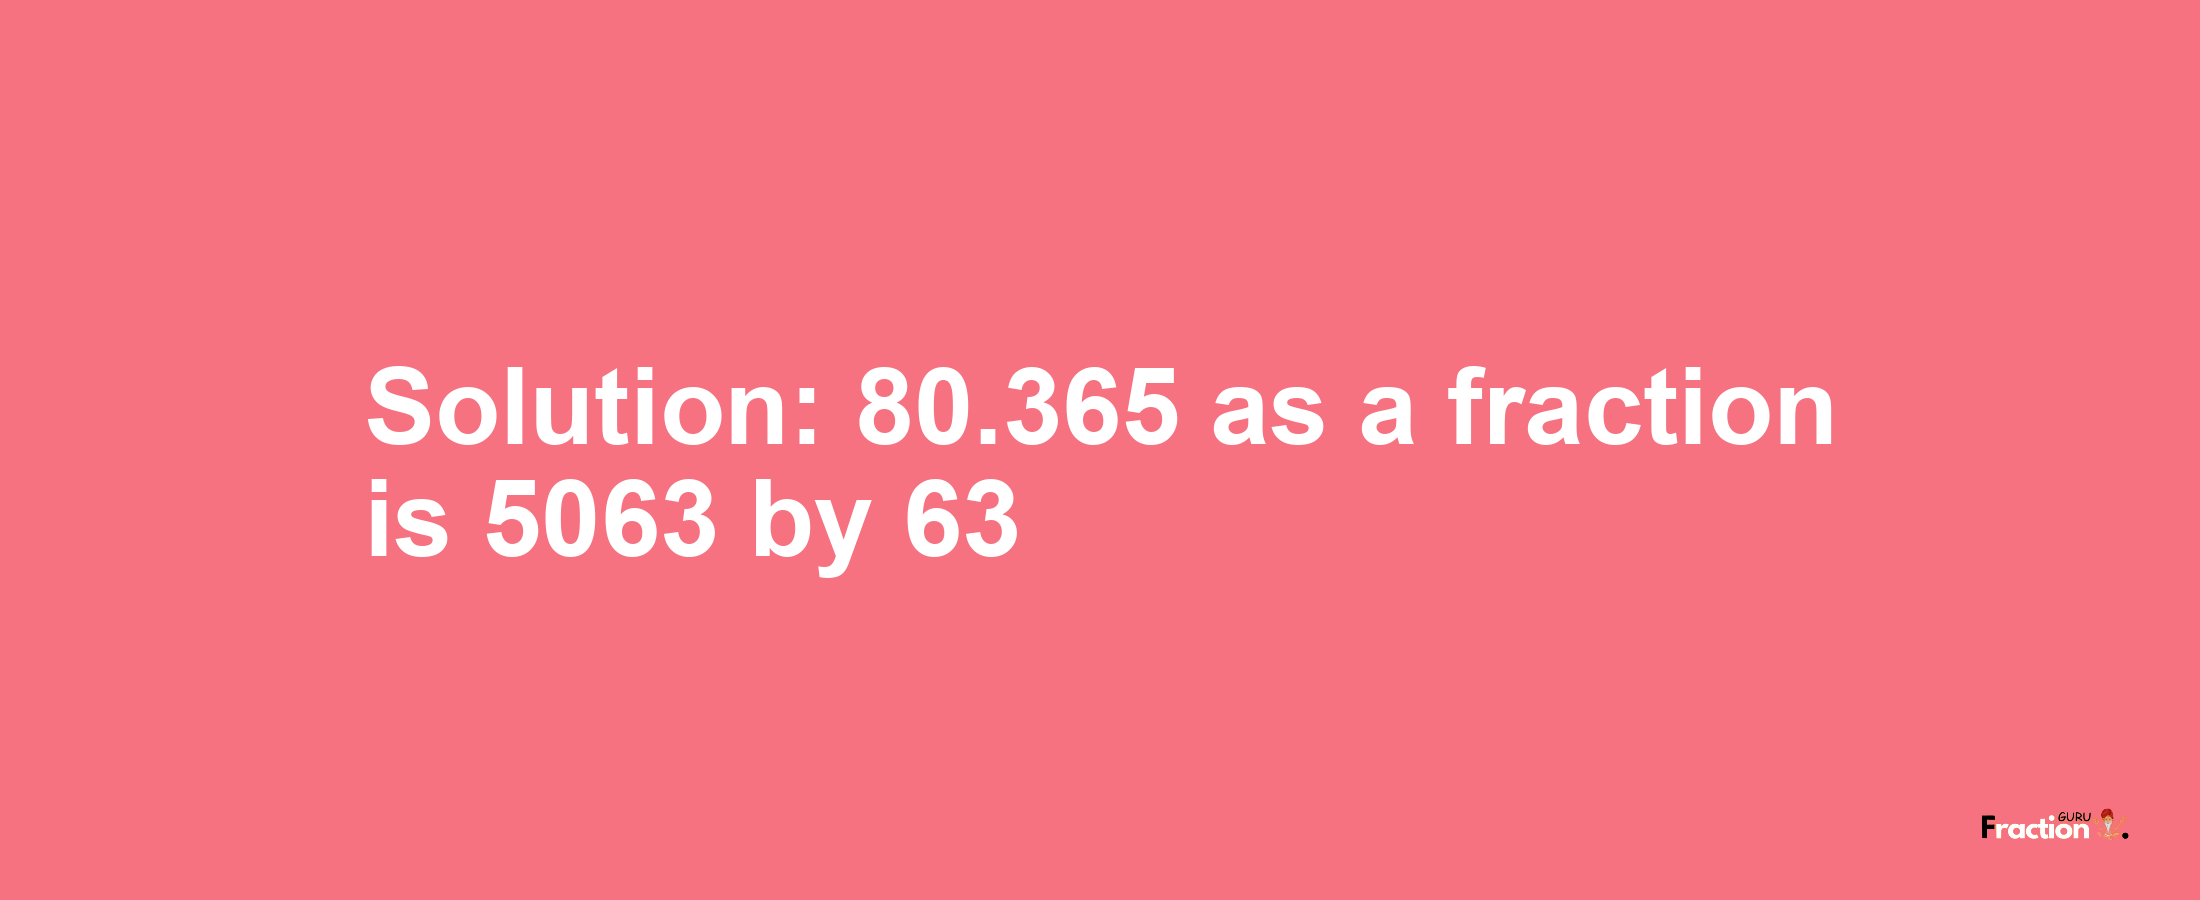 Solution:80.365 as a fraction is 5063/63